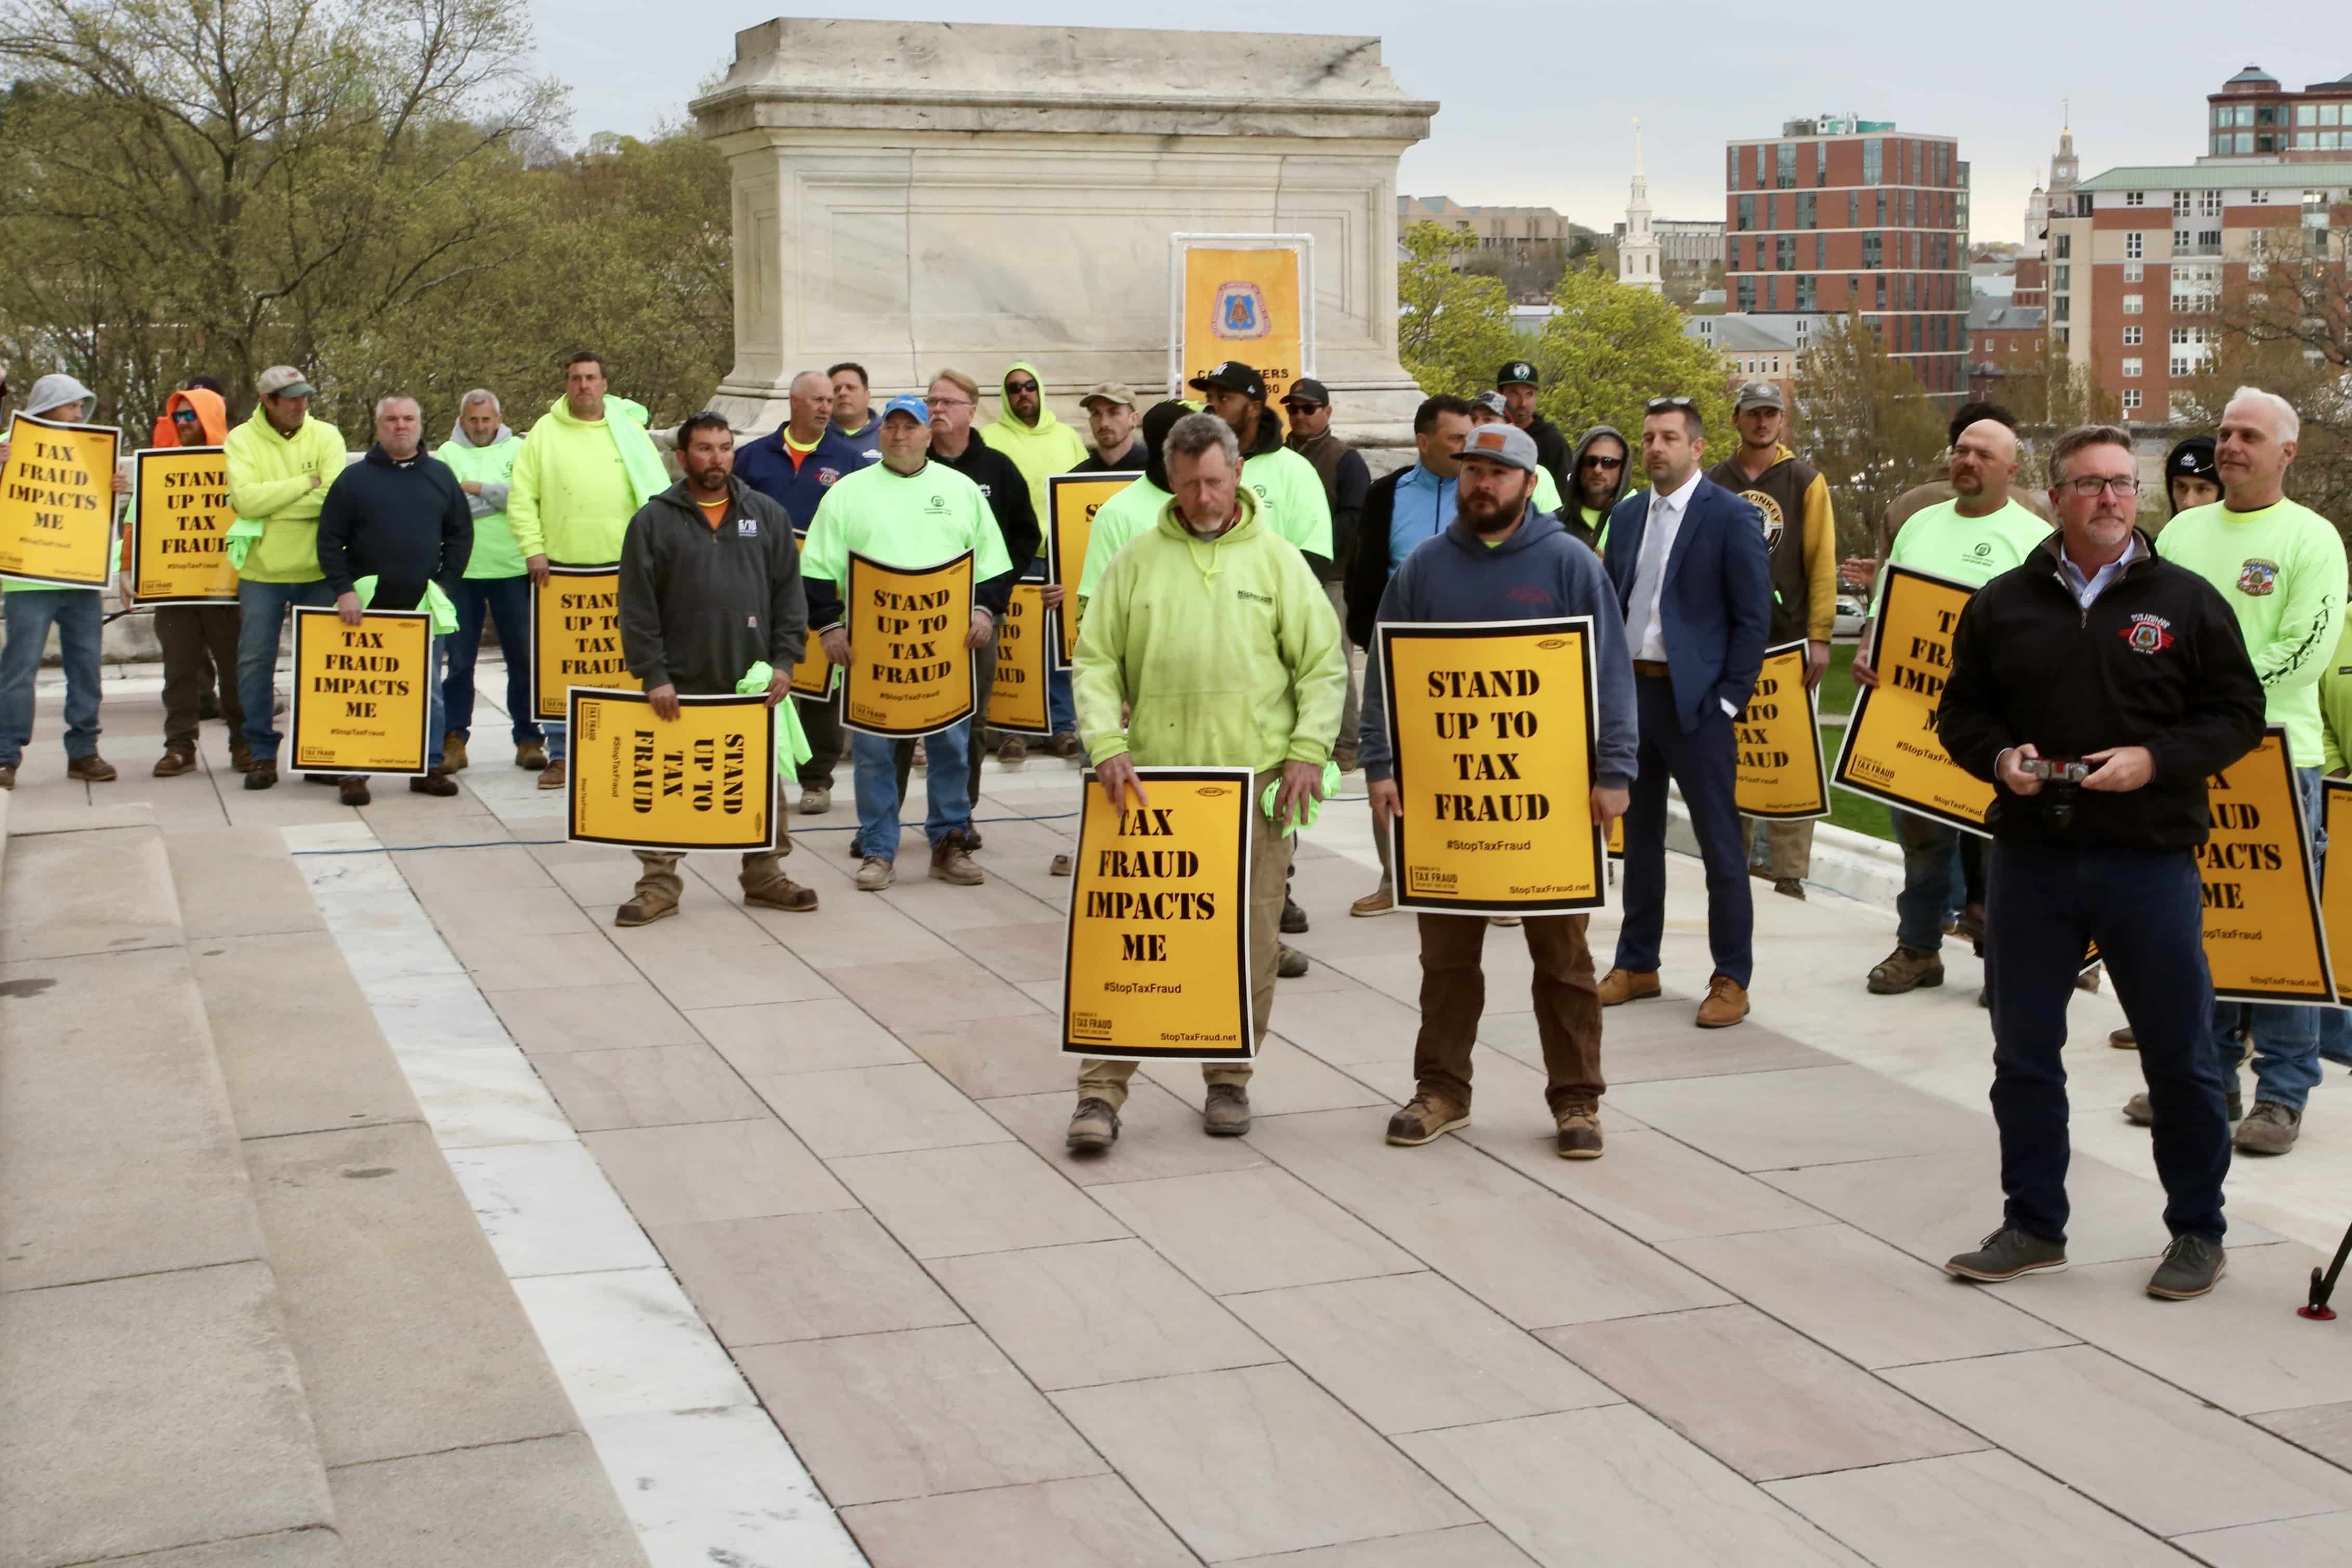 Rhode Island: Rhode Island carpenters union fights wage theft & tax fraud at annual tax day of action